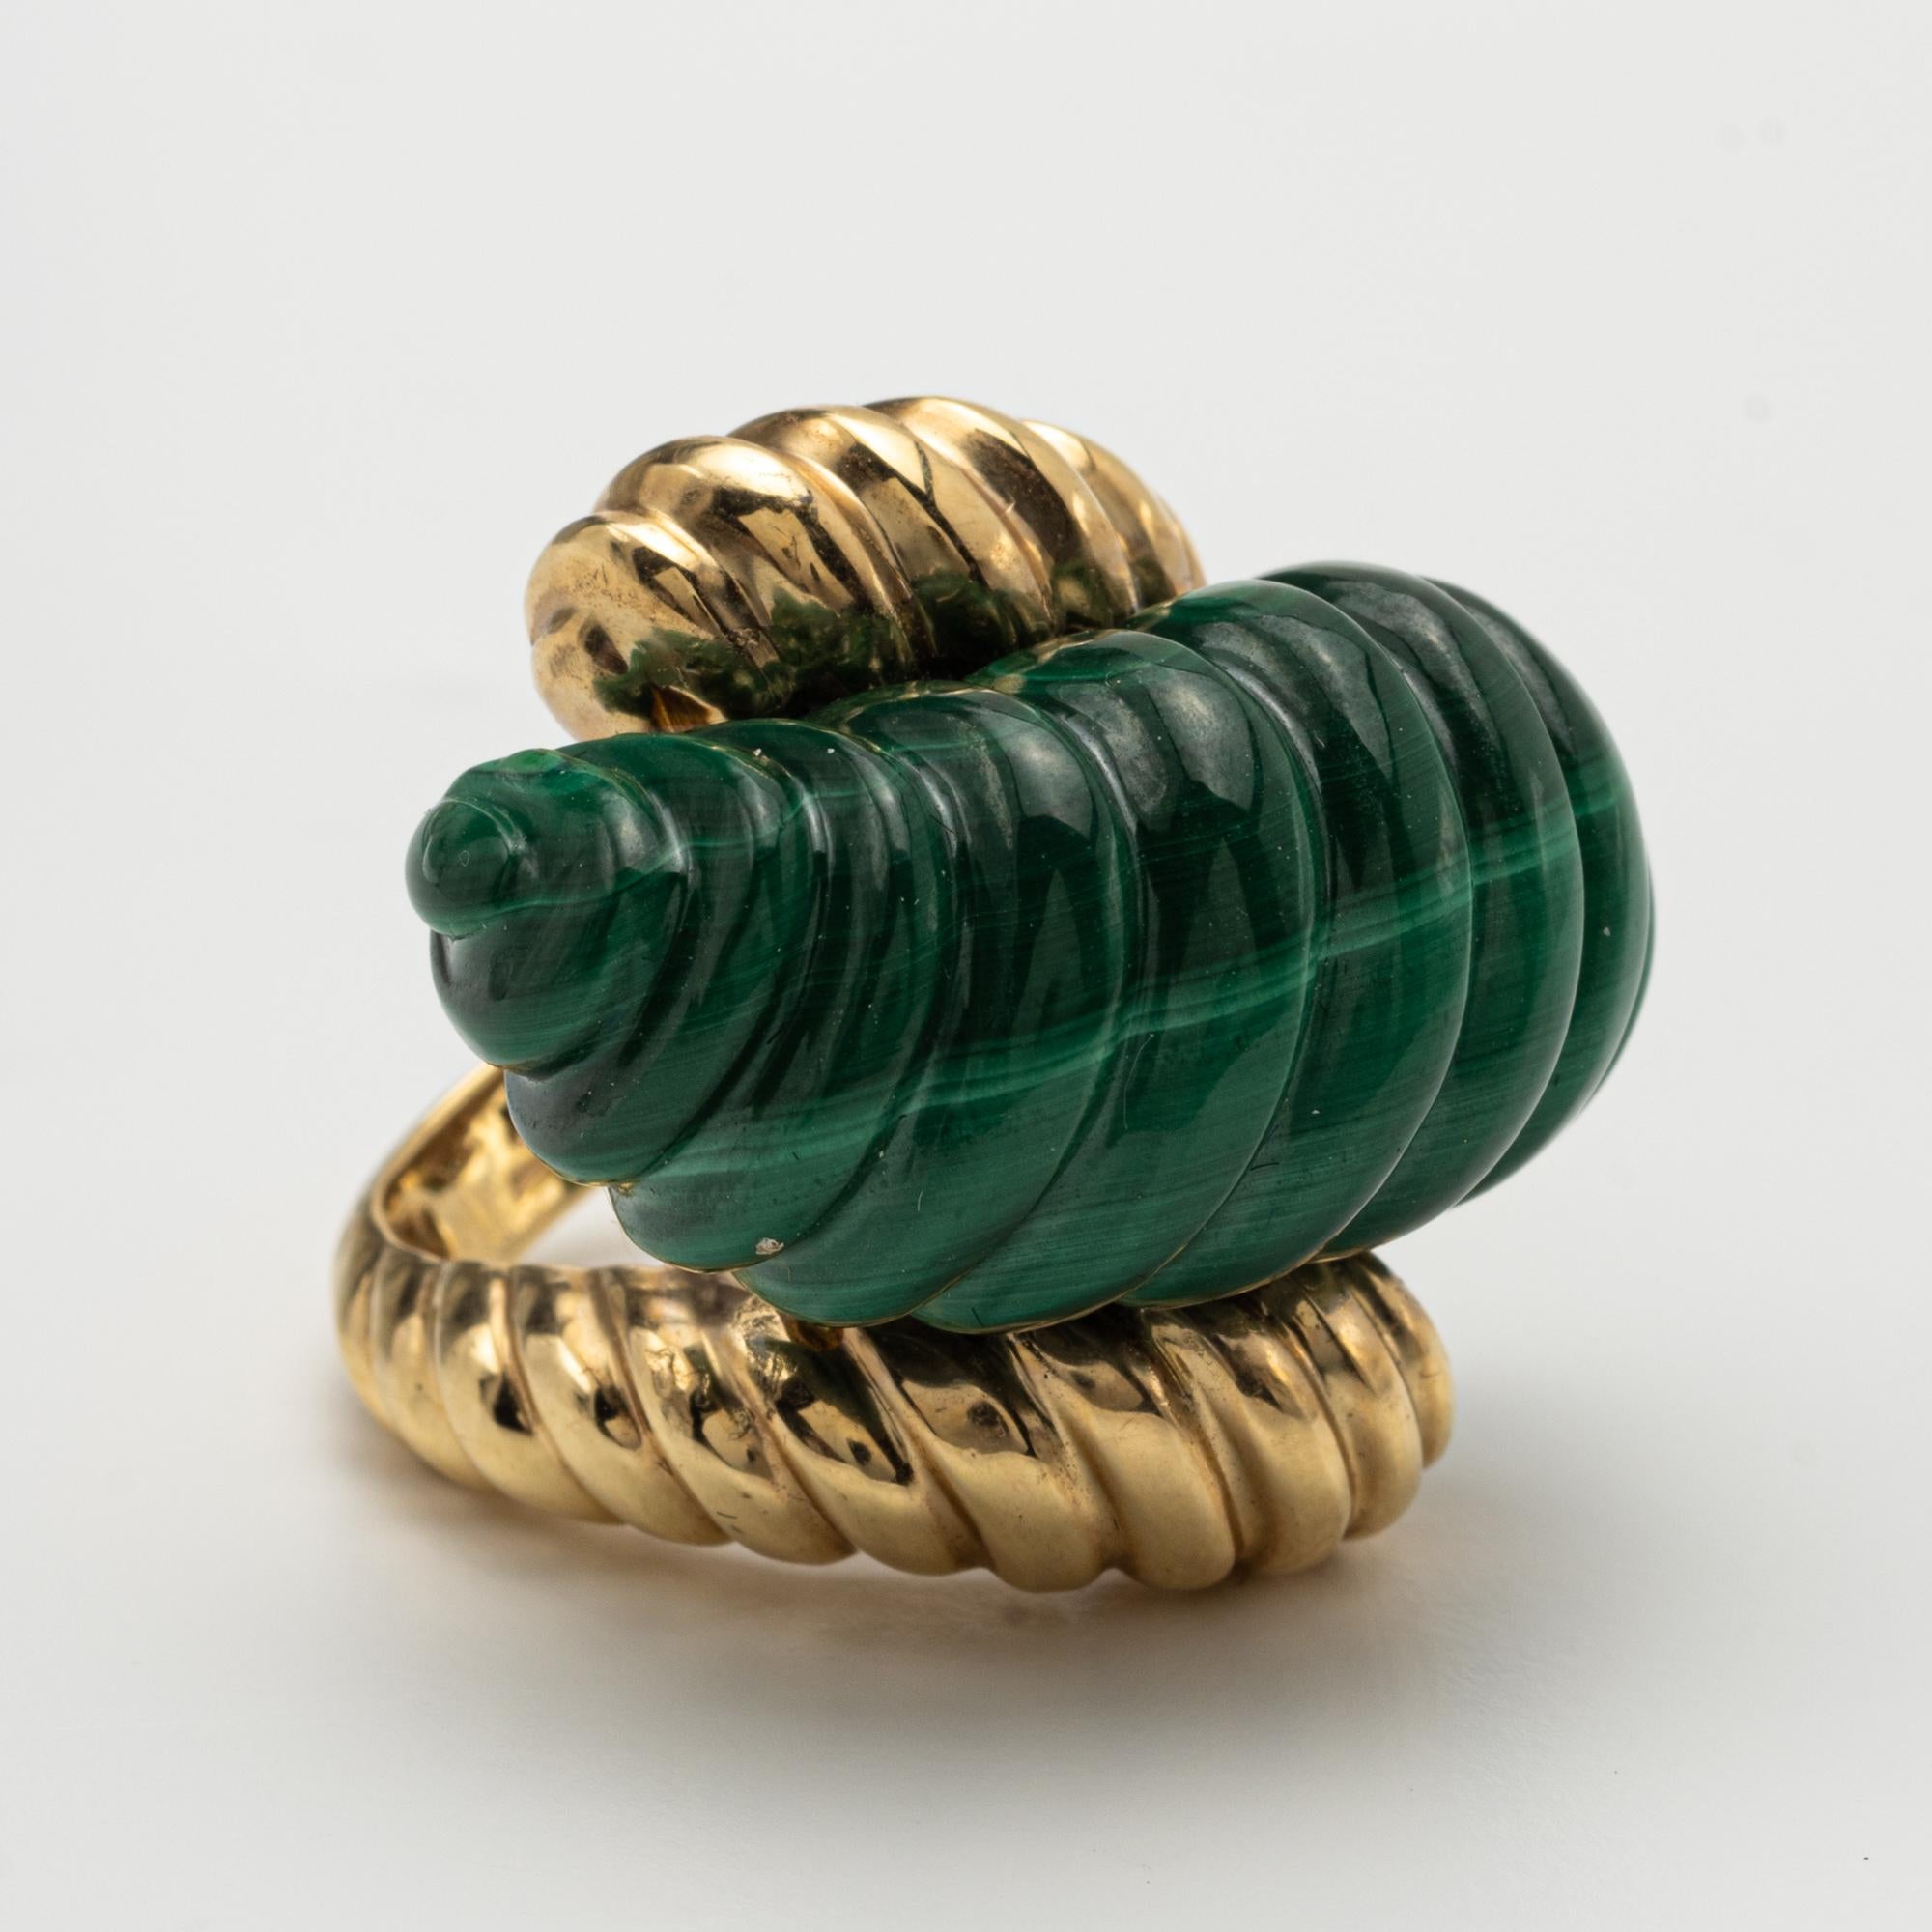 A 14k yellow gold and malachite abstract ring
size 5 3/4